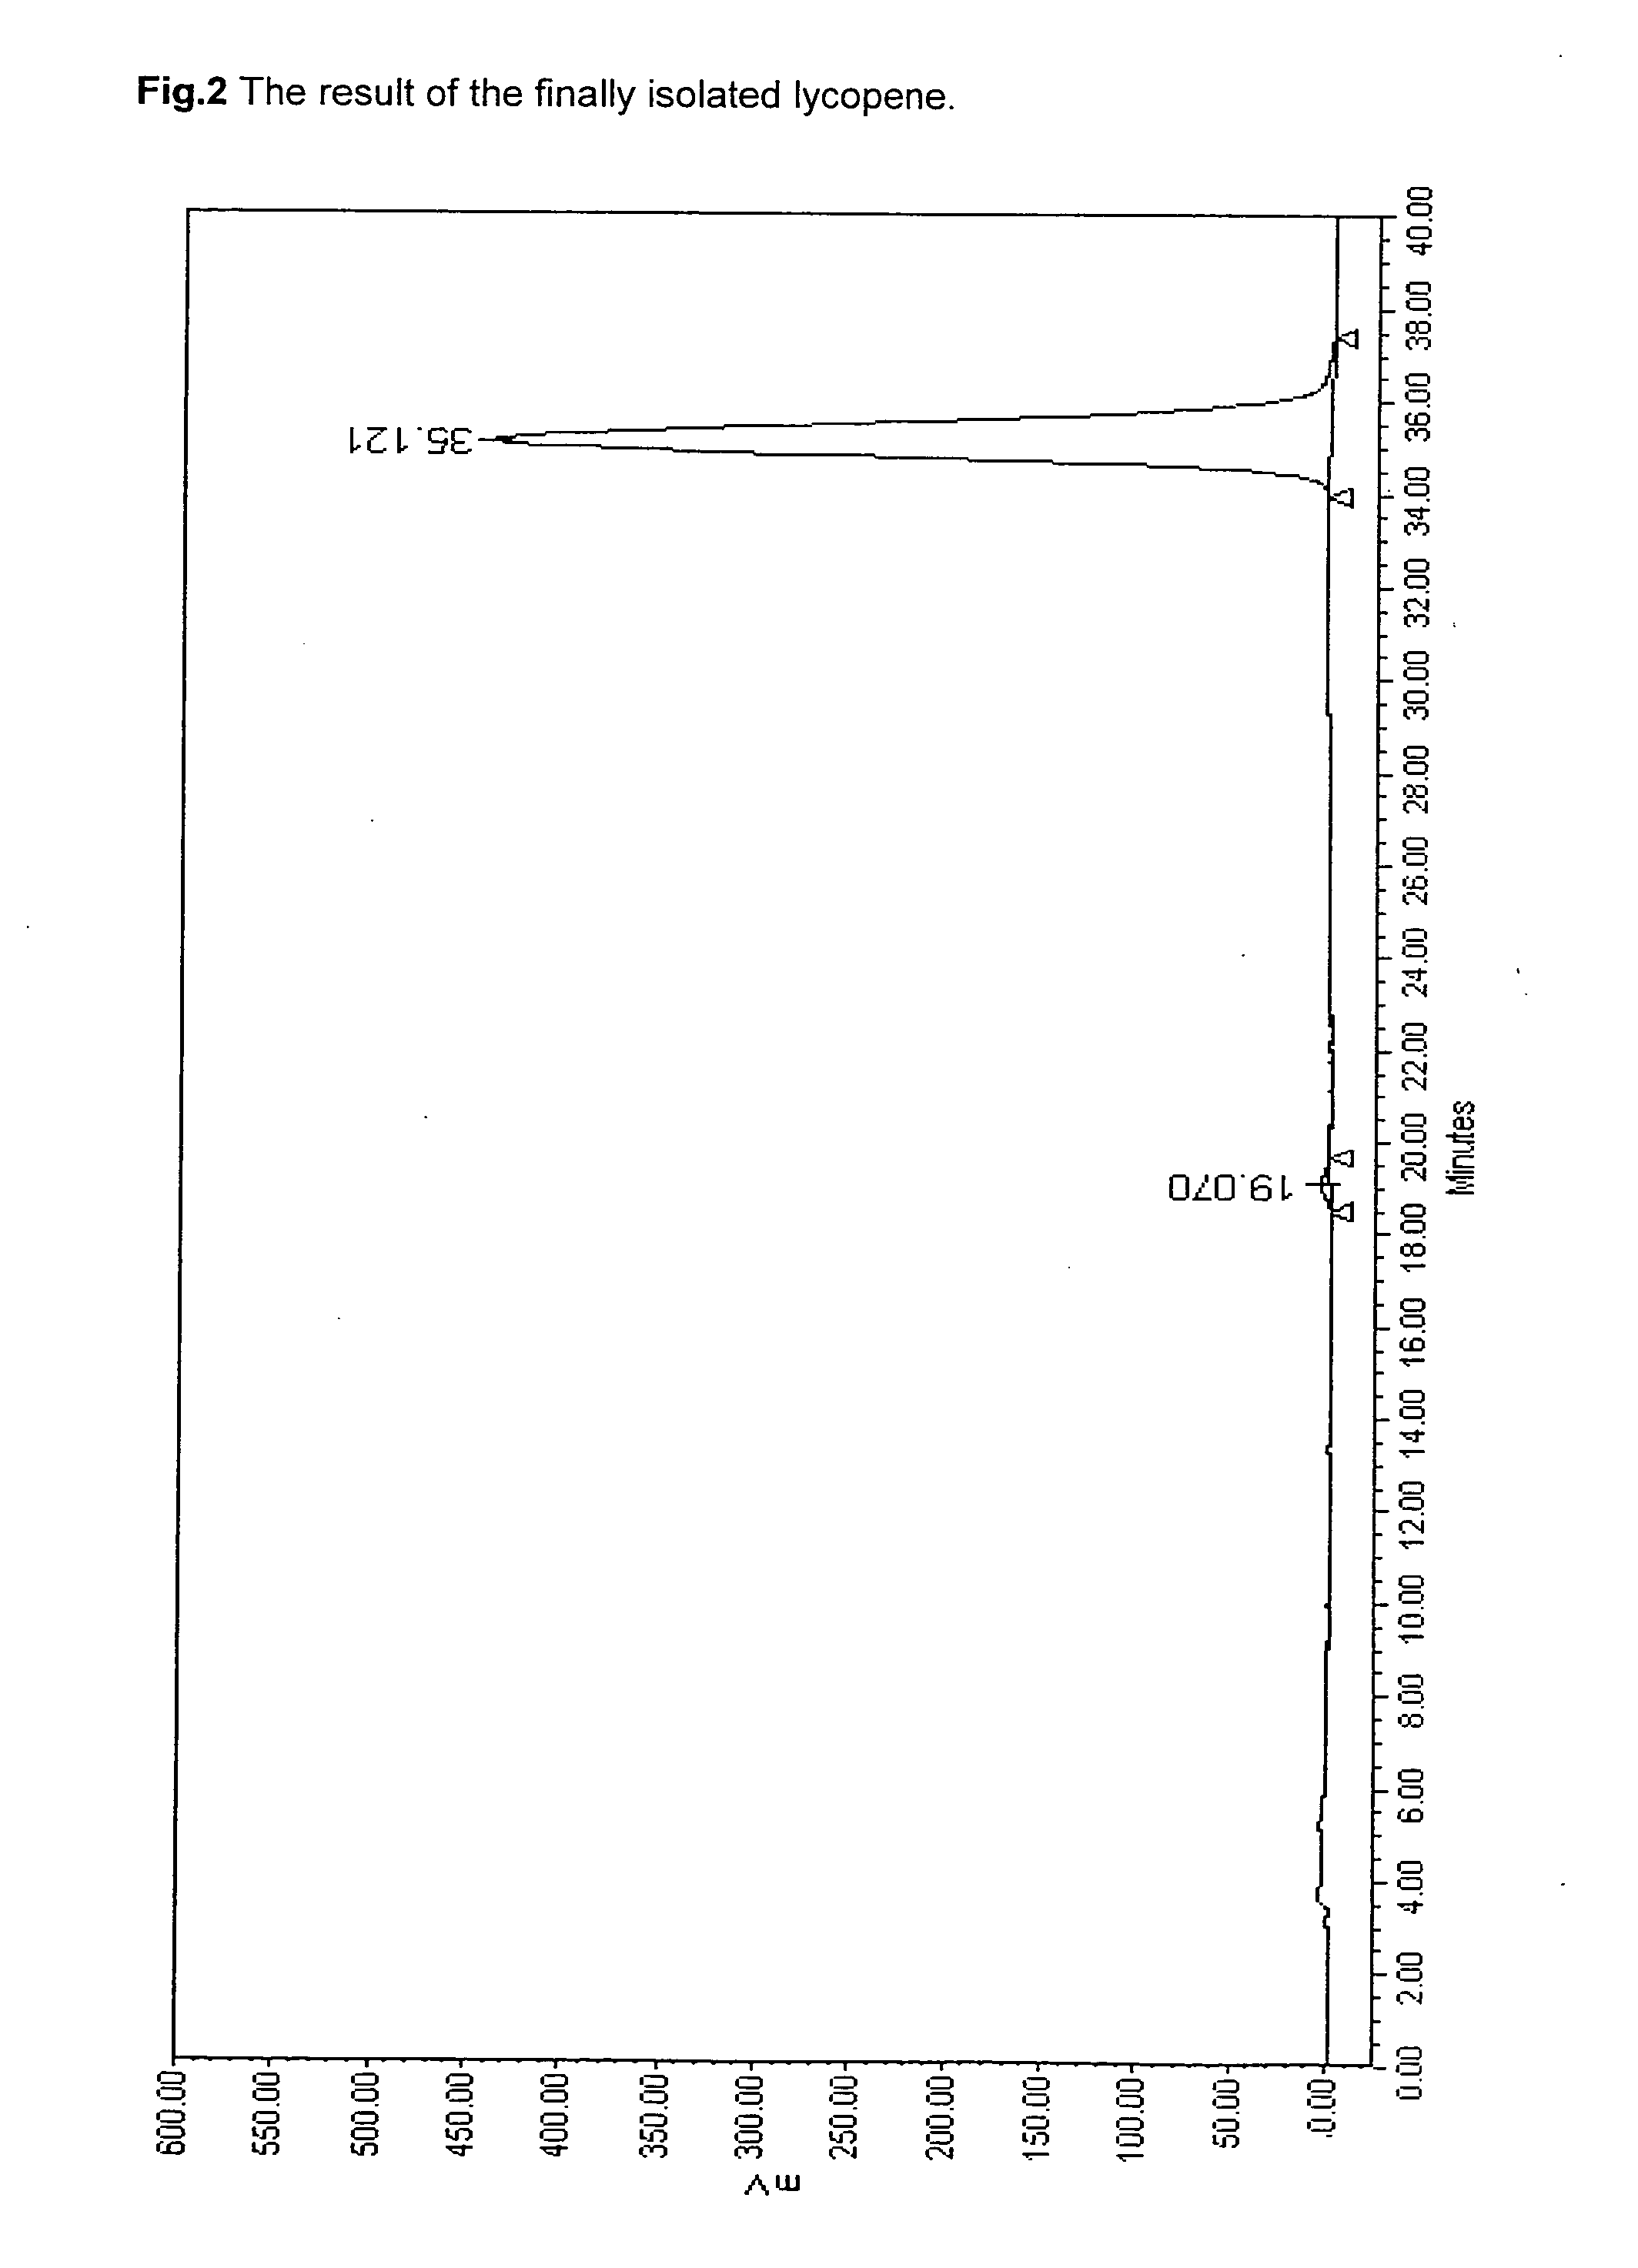 Process for obtaining biosynthesized lycopene from bacterial cells and the purified lycopene of the same